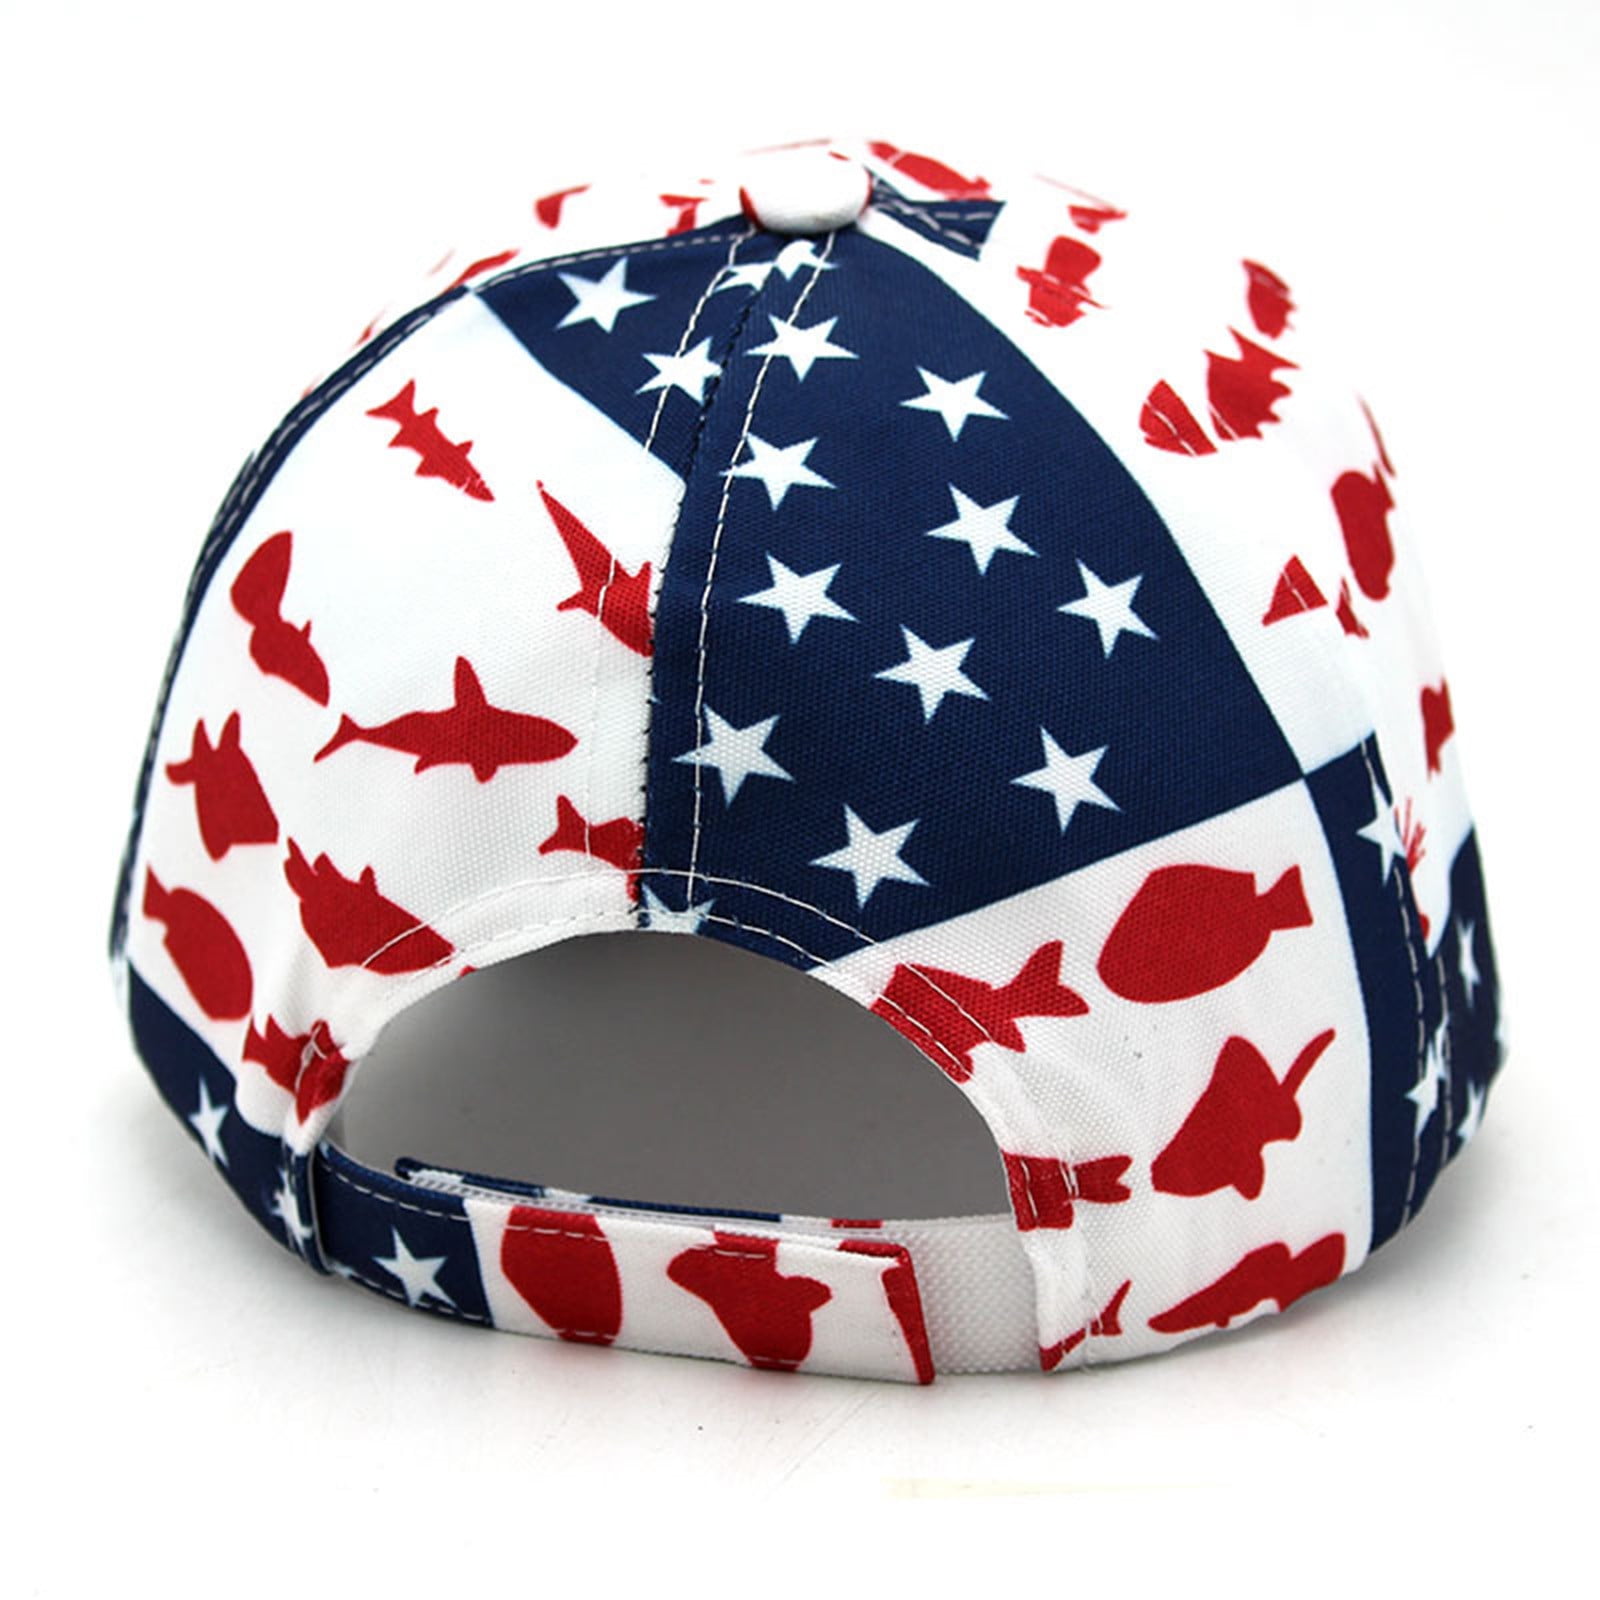 Tarmeek 4th of July Hat American Flag Baseball Cap Fishing Sailing  Adjustable Dad Hat Embroidered USA Hats Outdoor Activities for Men Women 